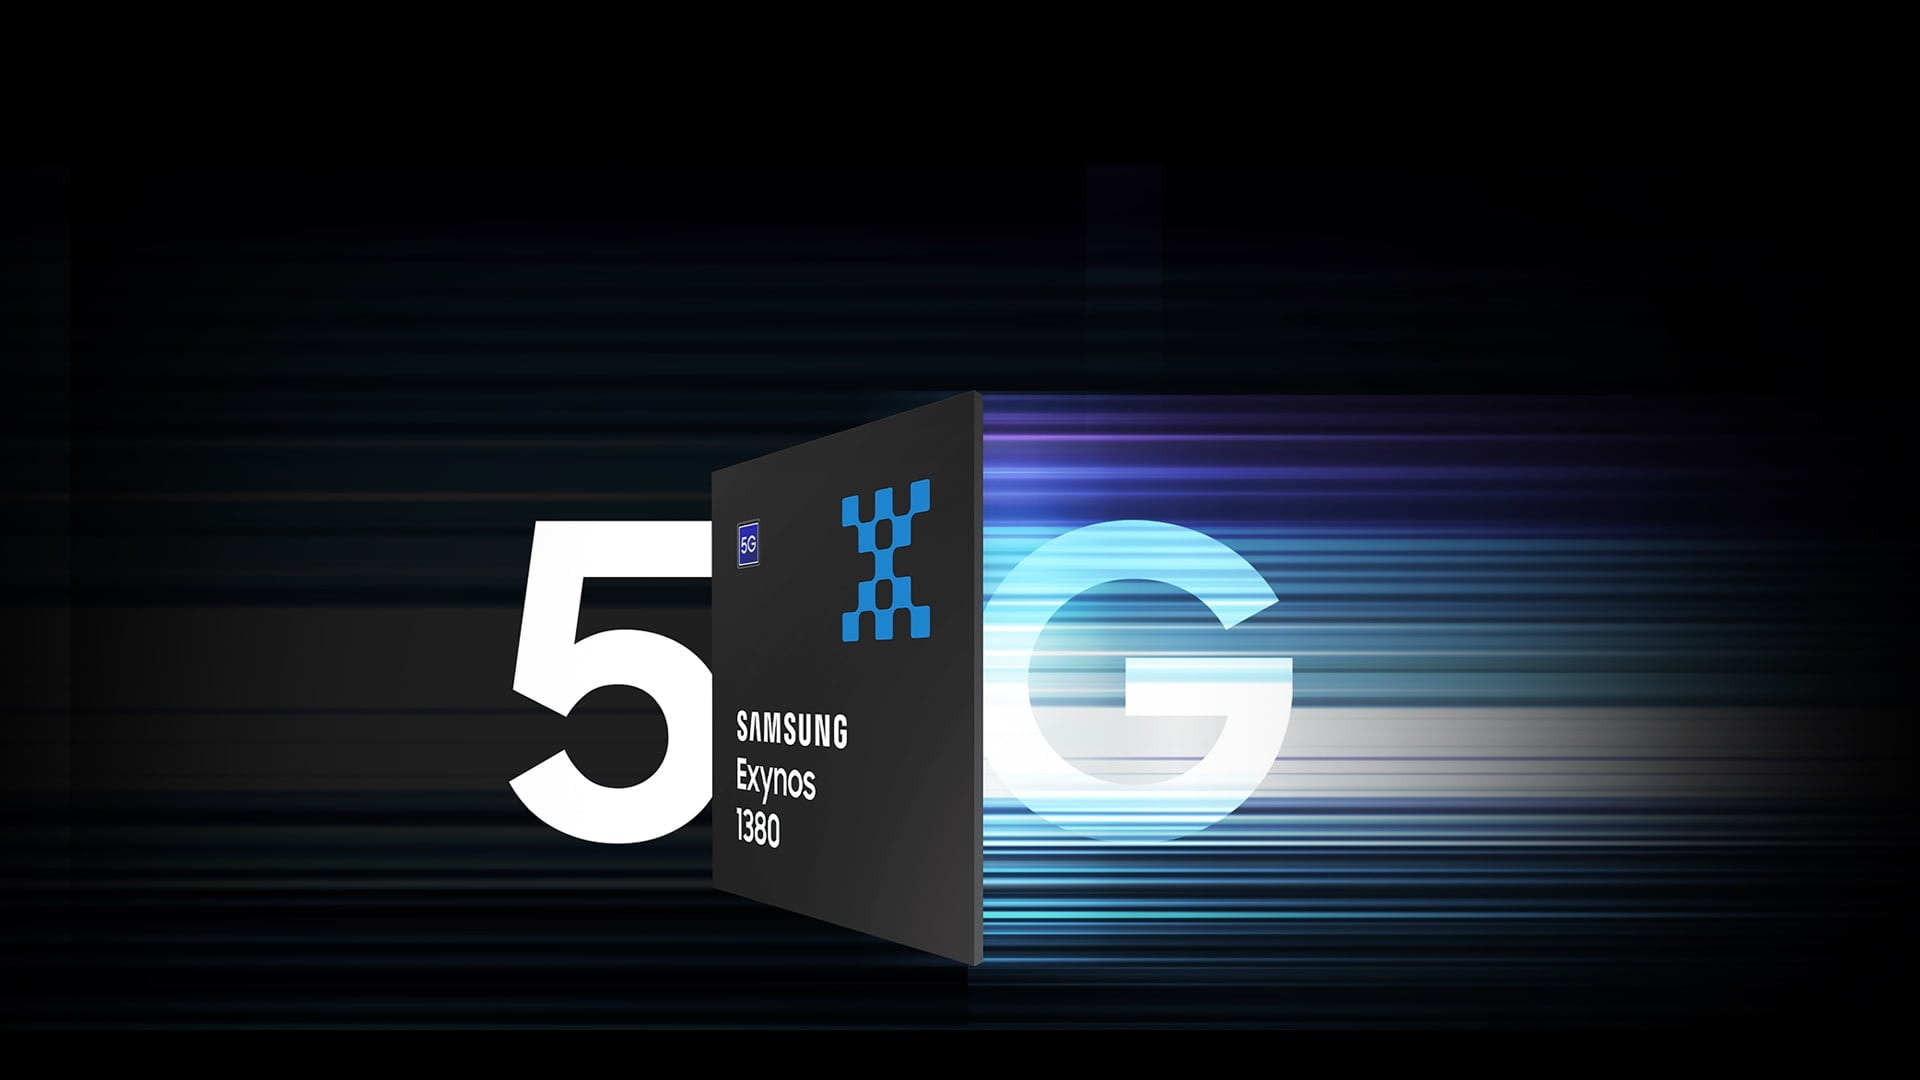 Exynos 1380 chip leaving an afterimage coming from the left and 5G letter to highlight the 5G speed thanks to the Exynos 1380's modem